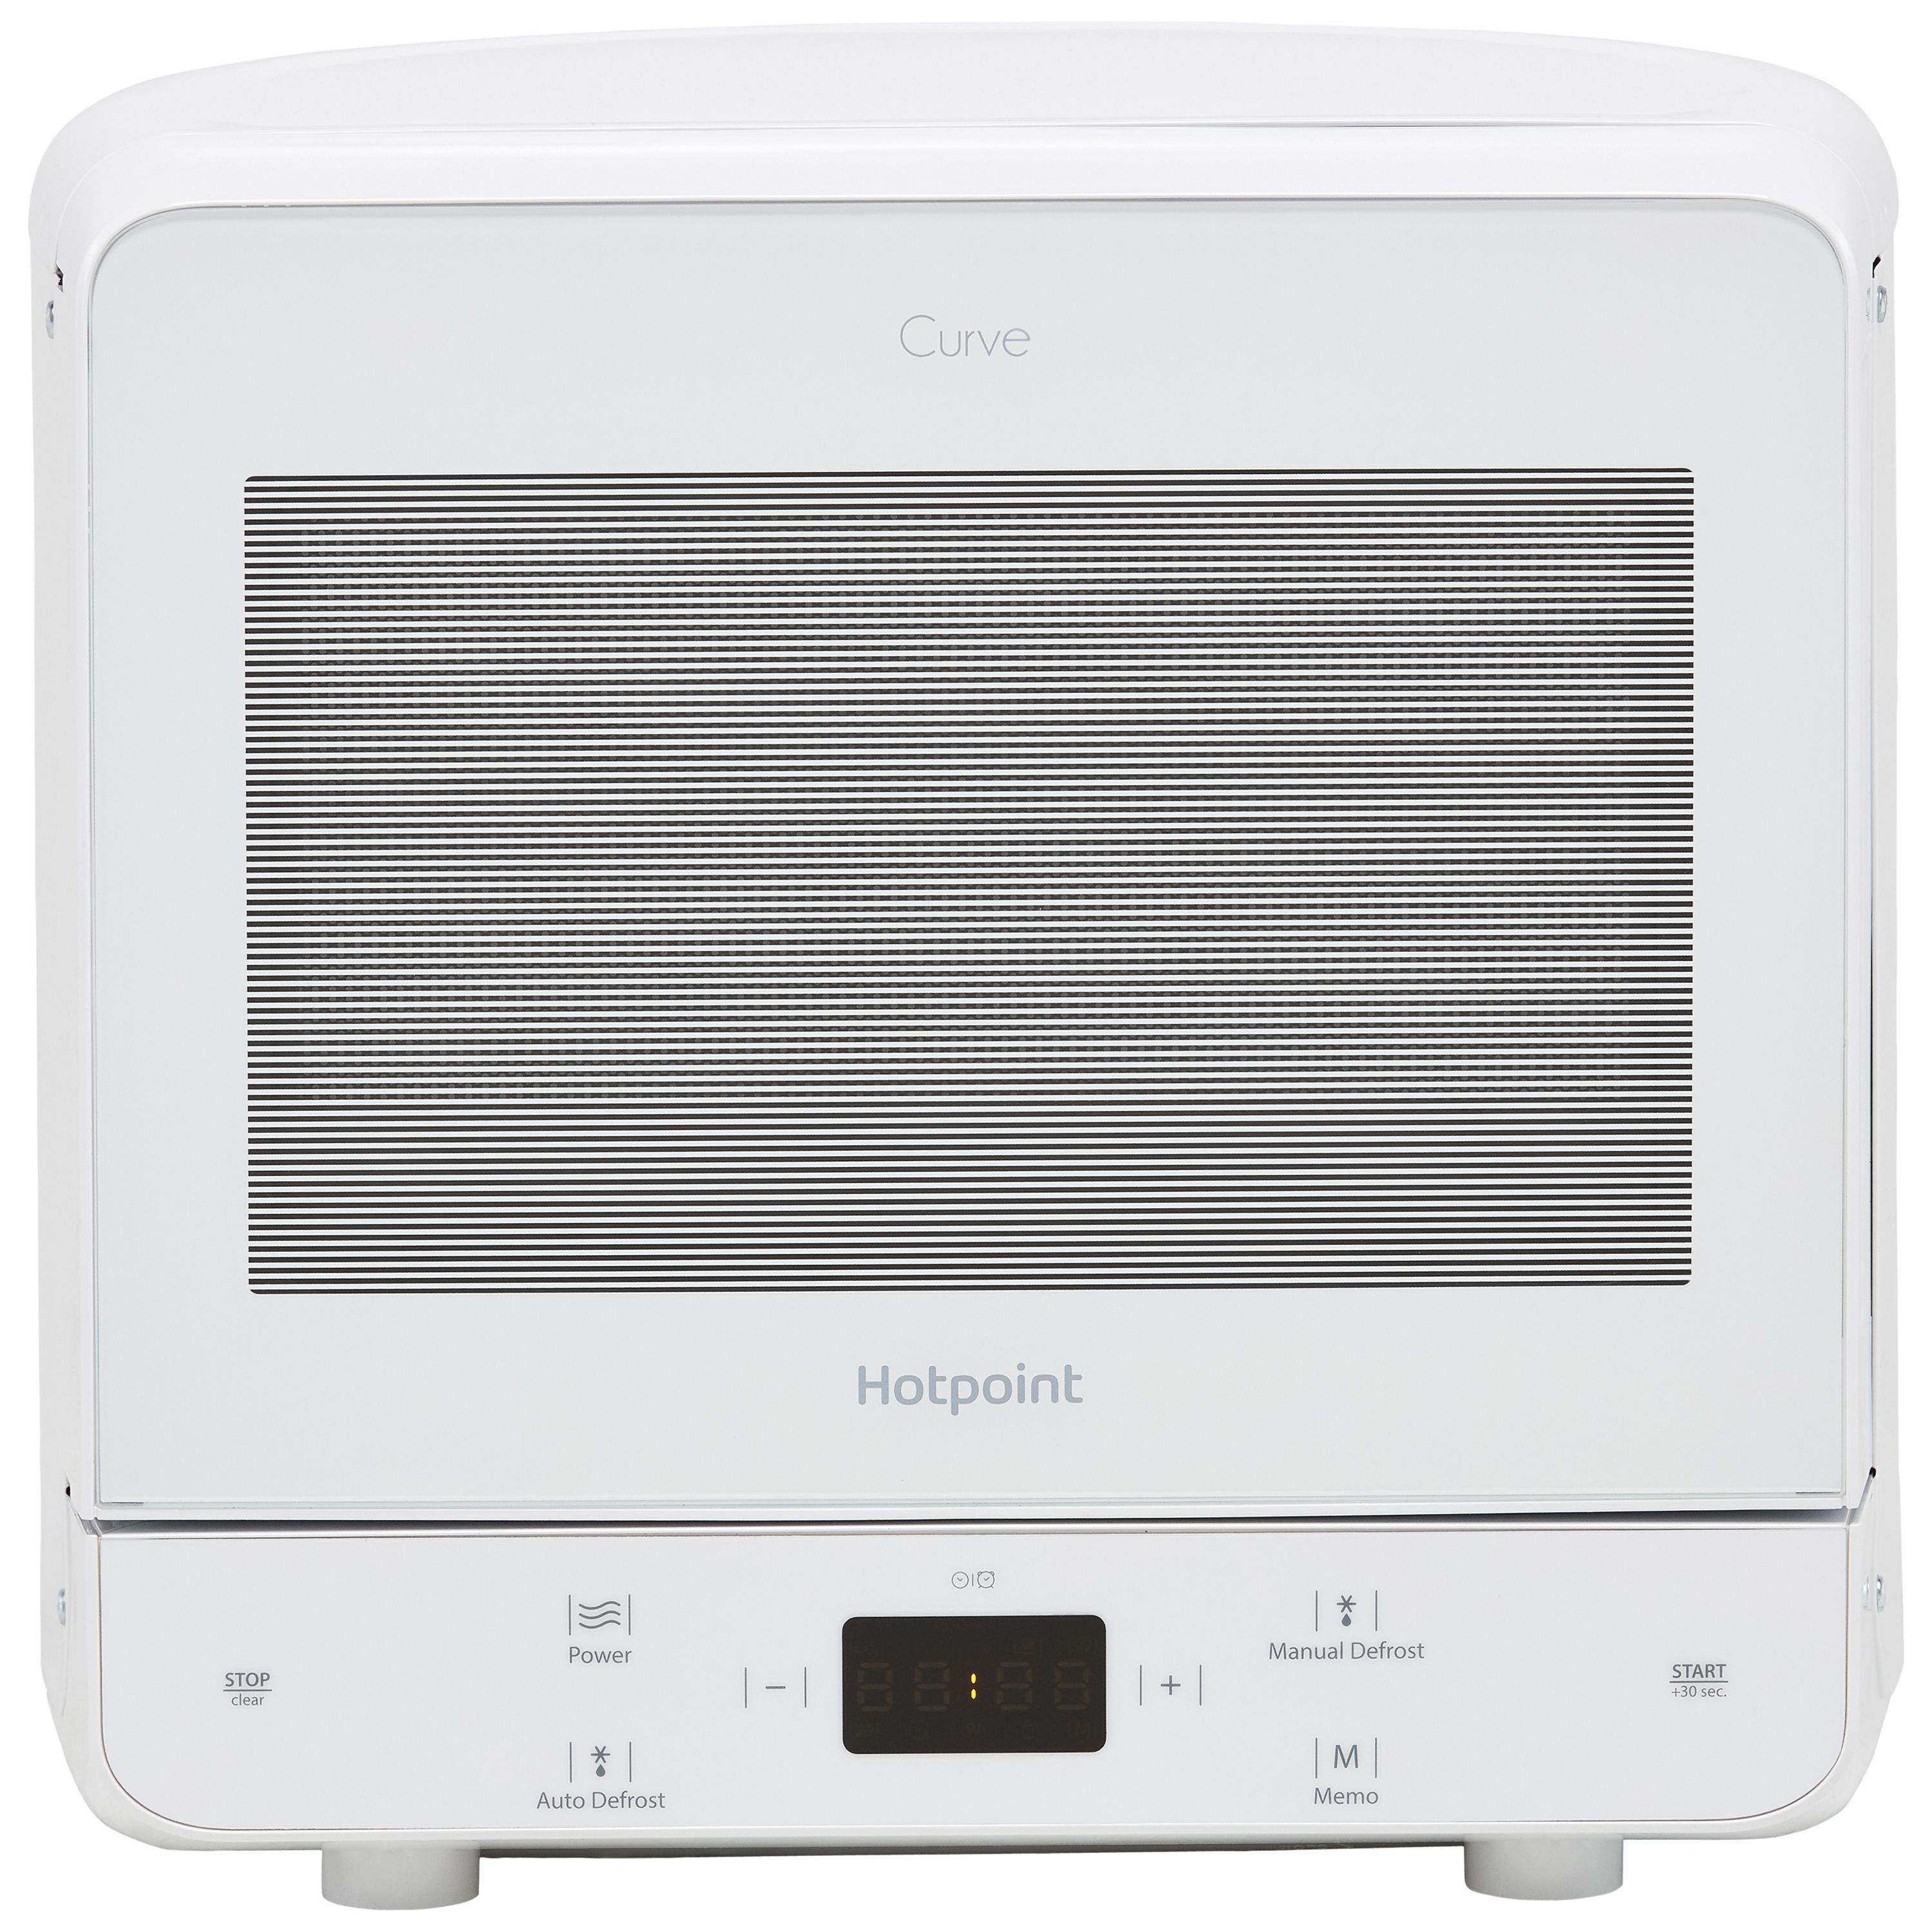 Hotpoint Curve MWH1331FW_WH 13L Freestanding Microwave - White